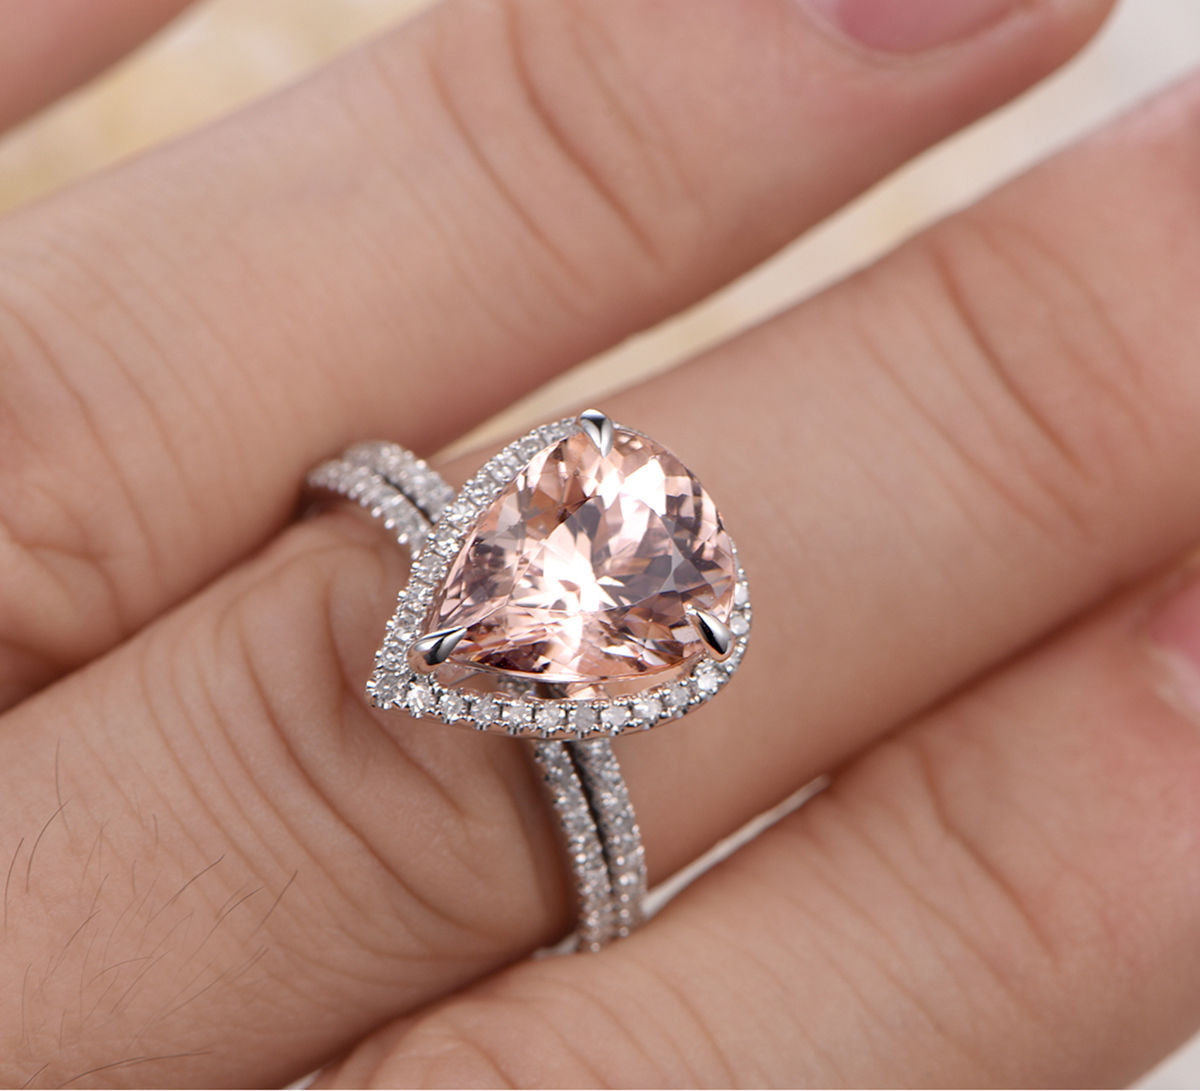 Pear Morganite Engagement Ring Sets Pave Diamond Wedding 14K White Gold 10x12mm - Lord of Gem Rings - 2